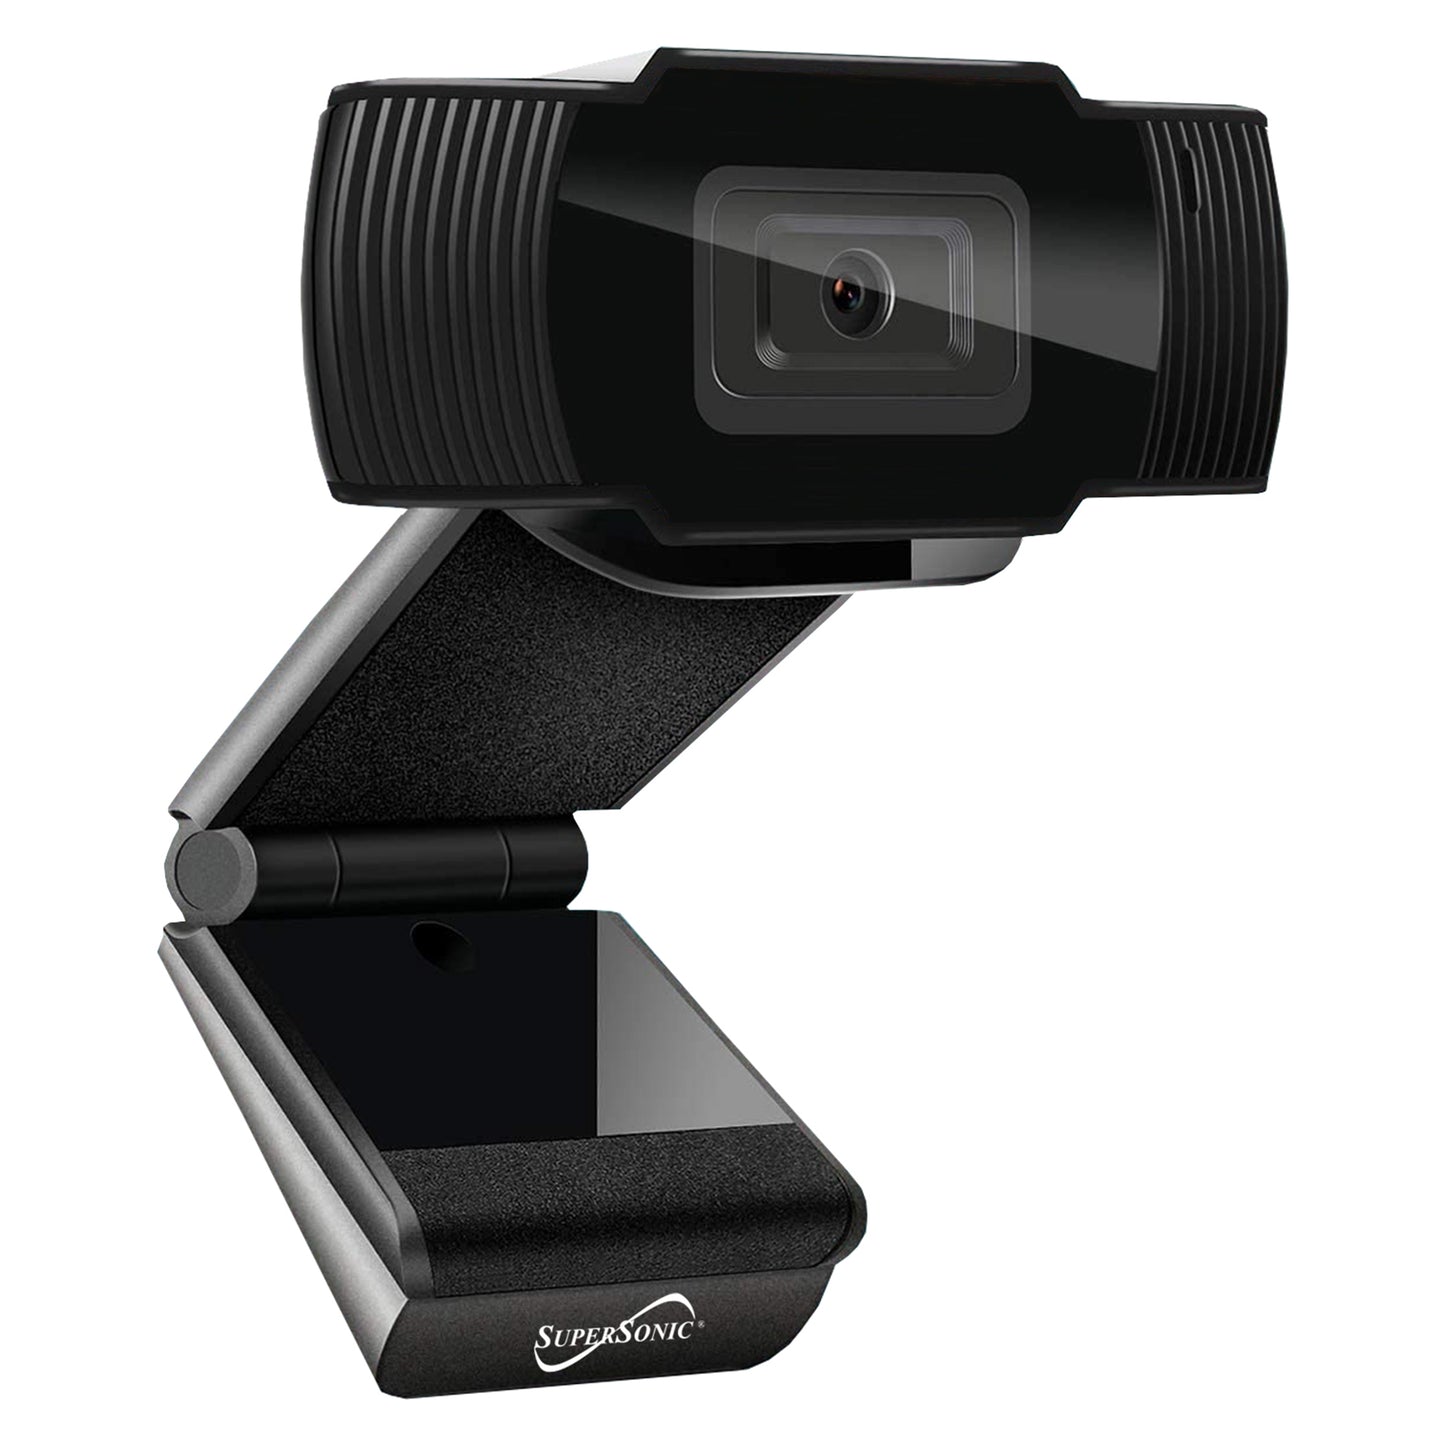 Pro-hd Webcam For Video Streaming And Recording